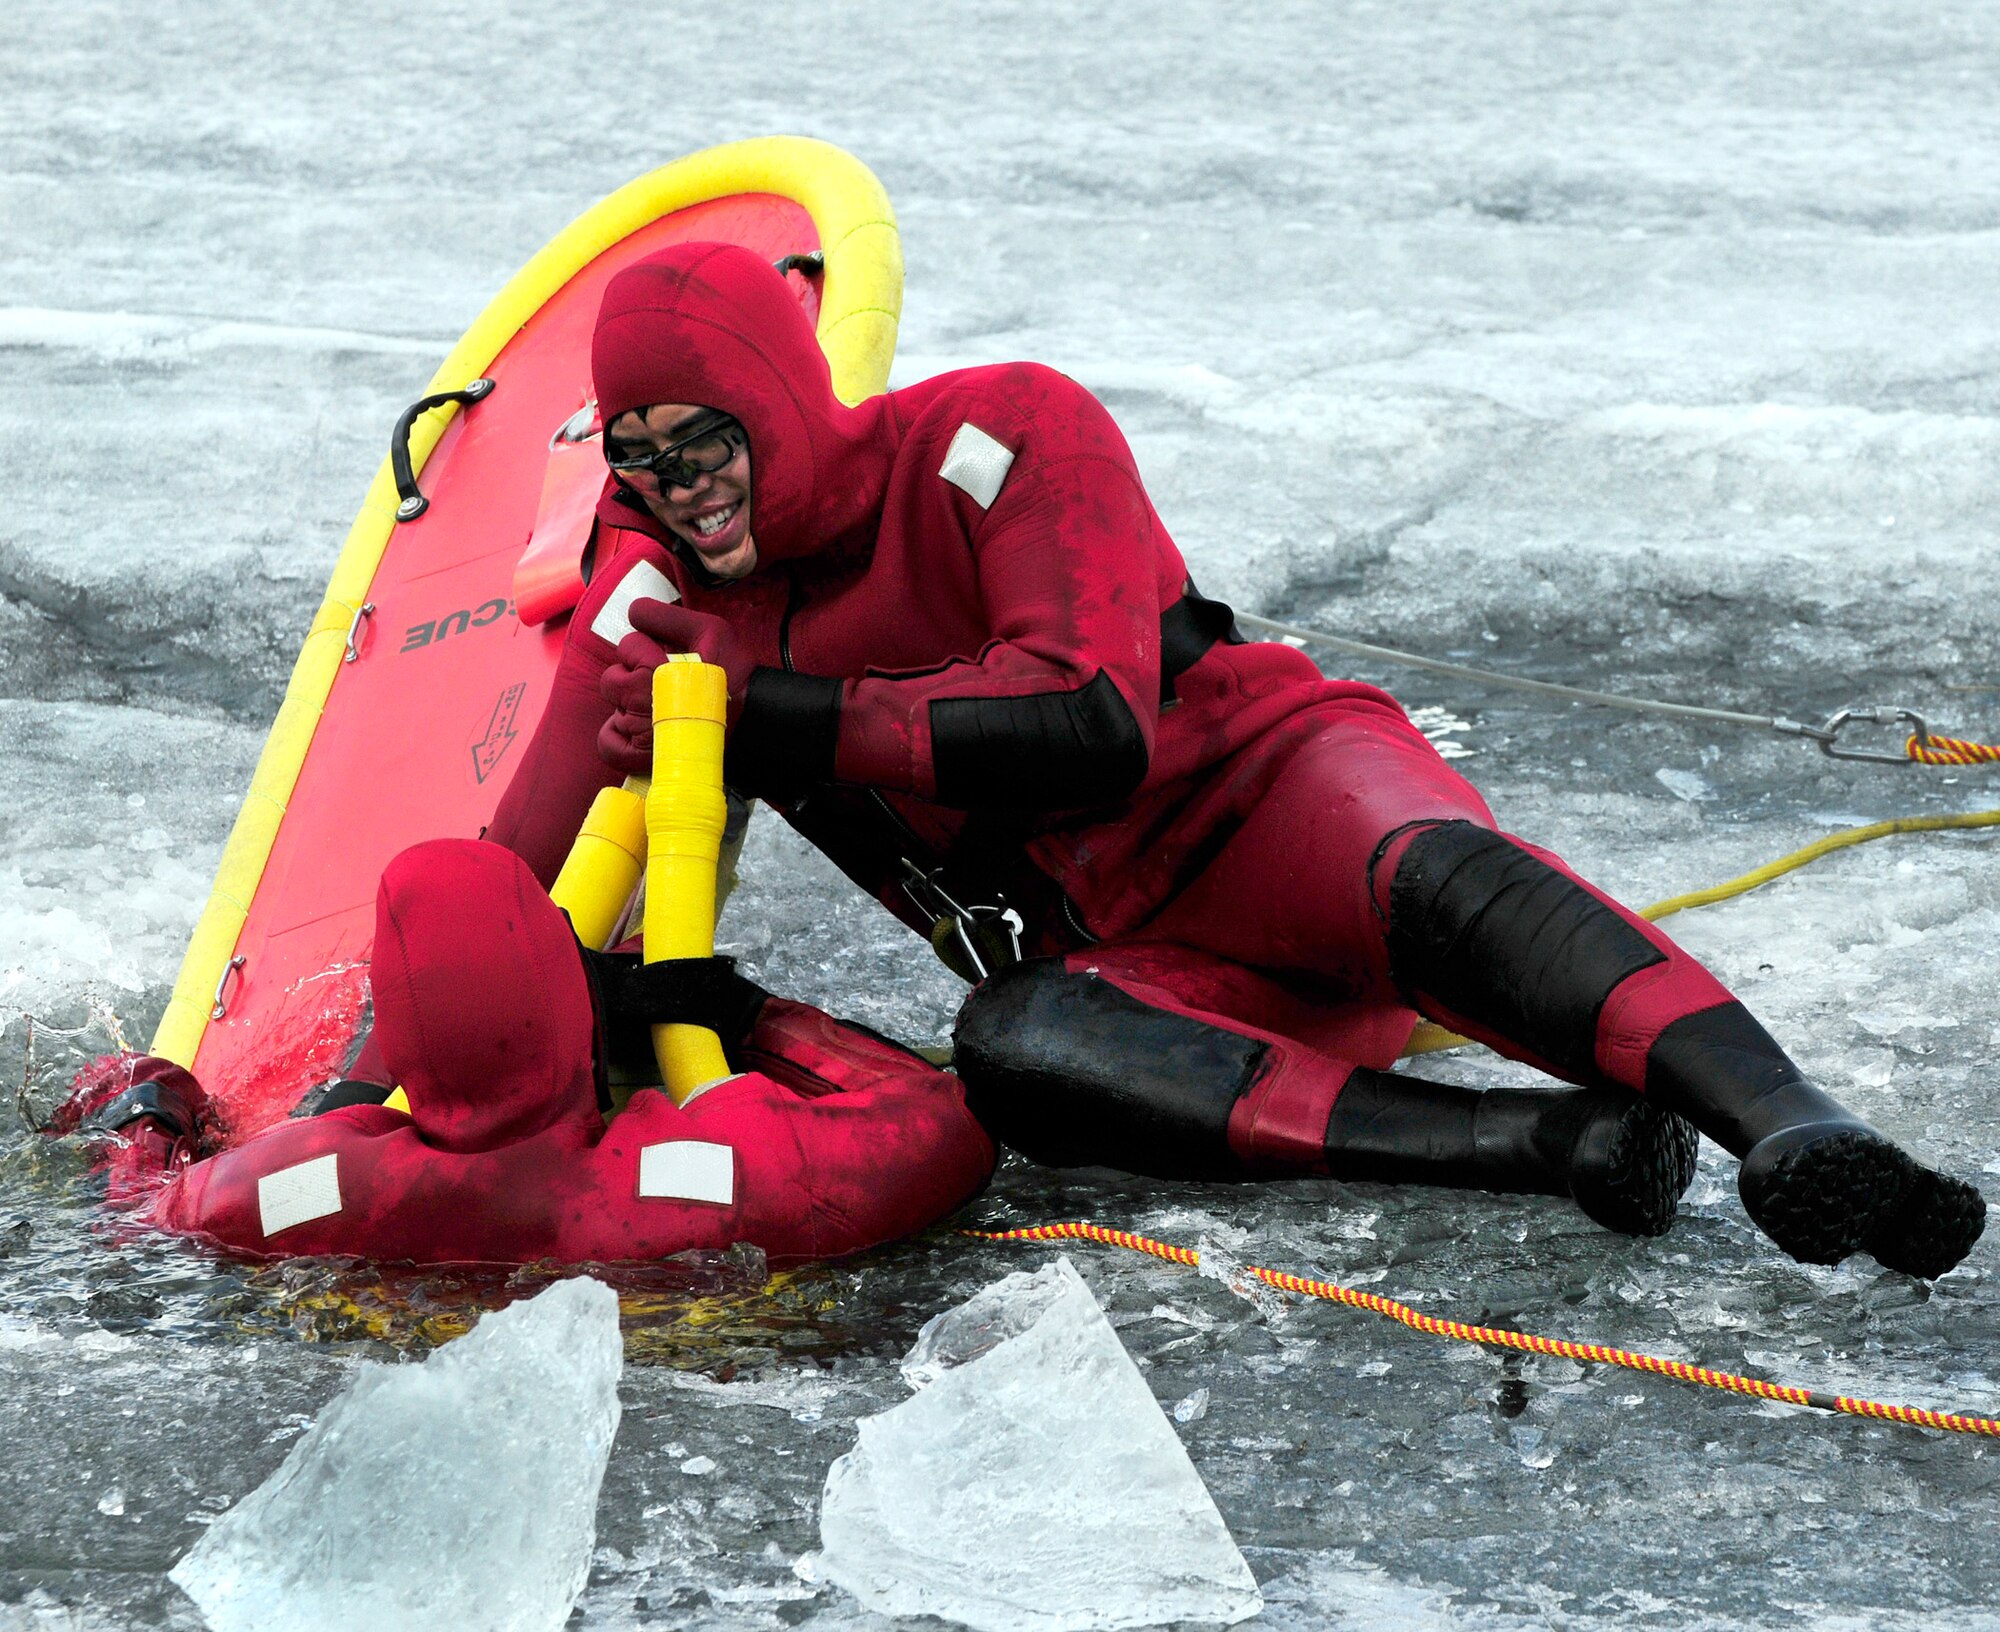 Airman 1st Class David Piasecki climbs out of a frozen lake onto a life raft that Senior Airman Bao Hoang stabilizes with his body during icy water rescue training May 6, 2011, at Eielson Air Force Base, Alaska. Airmen Hoang and Piasecki are fire fighters assigned to the 354th Civil Engineer Squadron Fire Protection Flight. (U.S. Air Force photo/Airman 1st Class Laura Goodgame)